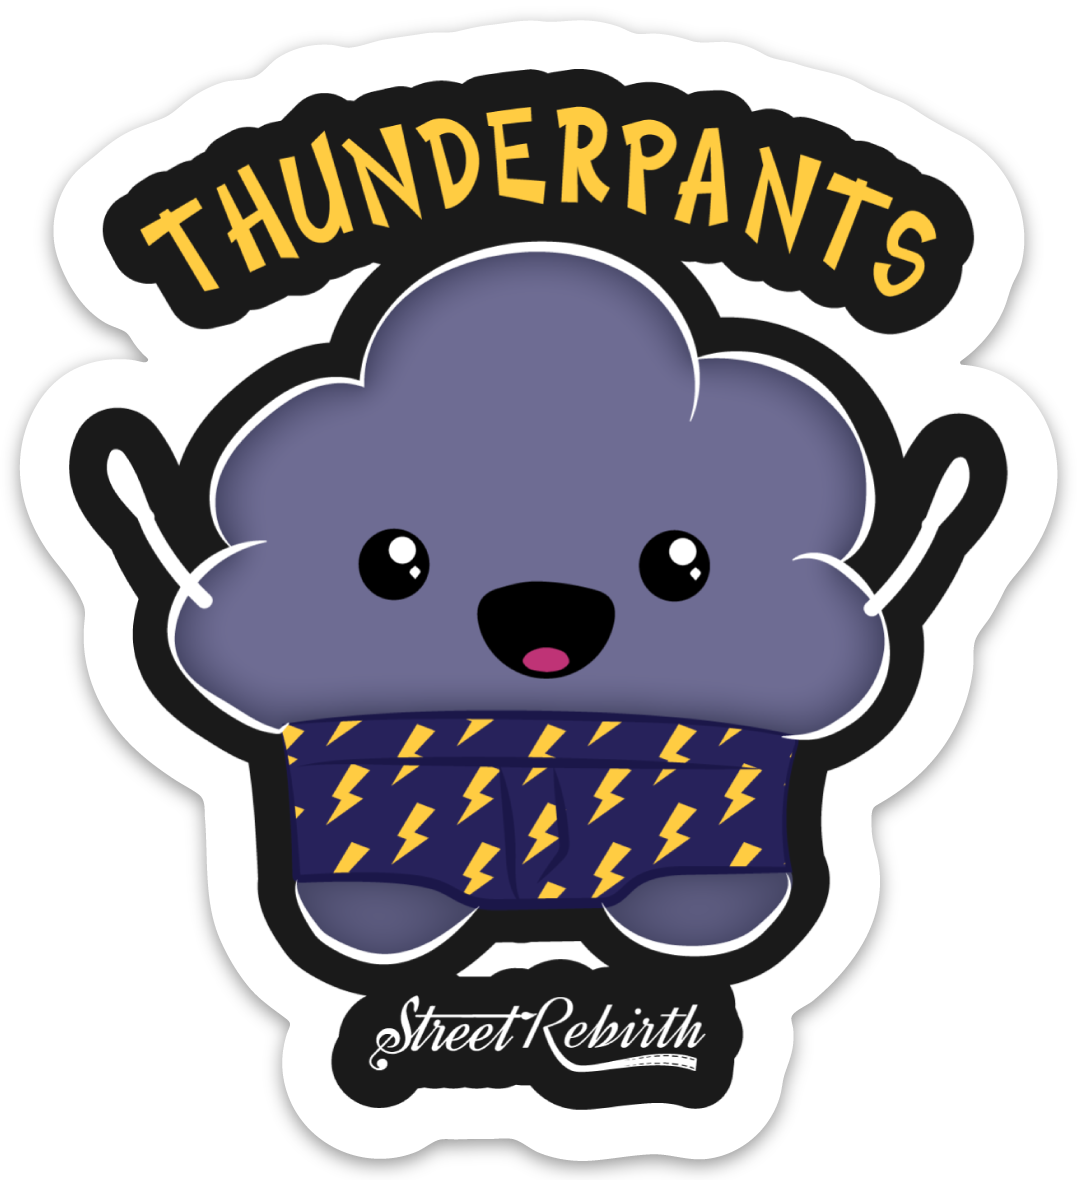 THUNDERPANTS PUN STICKER – ONE 4 INCH WATER PROOF VINYL STICKER – FOR HYDRO FLASK, SKATEBOARD, LAPTOP, PLANNER, CAR, COLLECTING, GIFTING